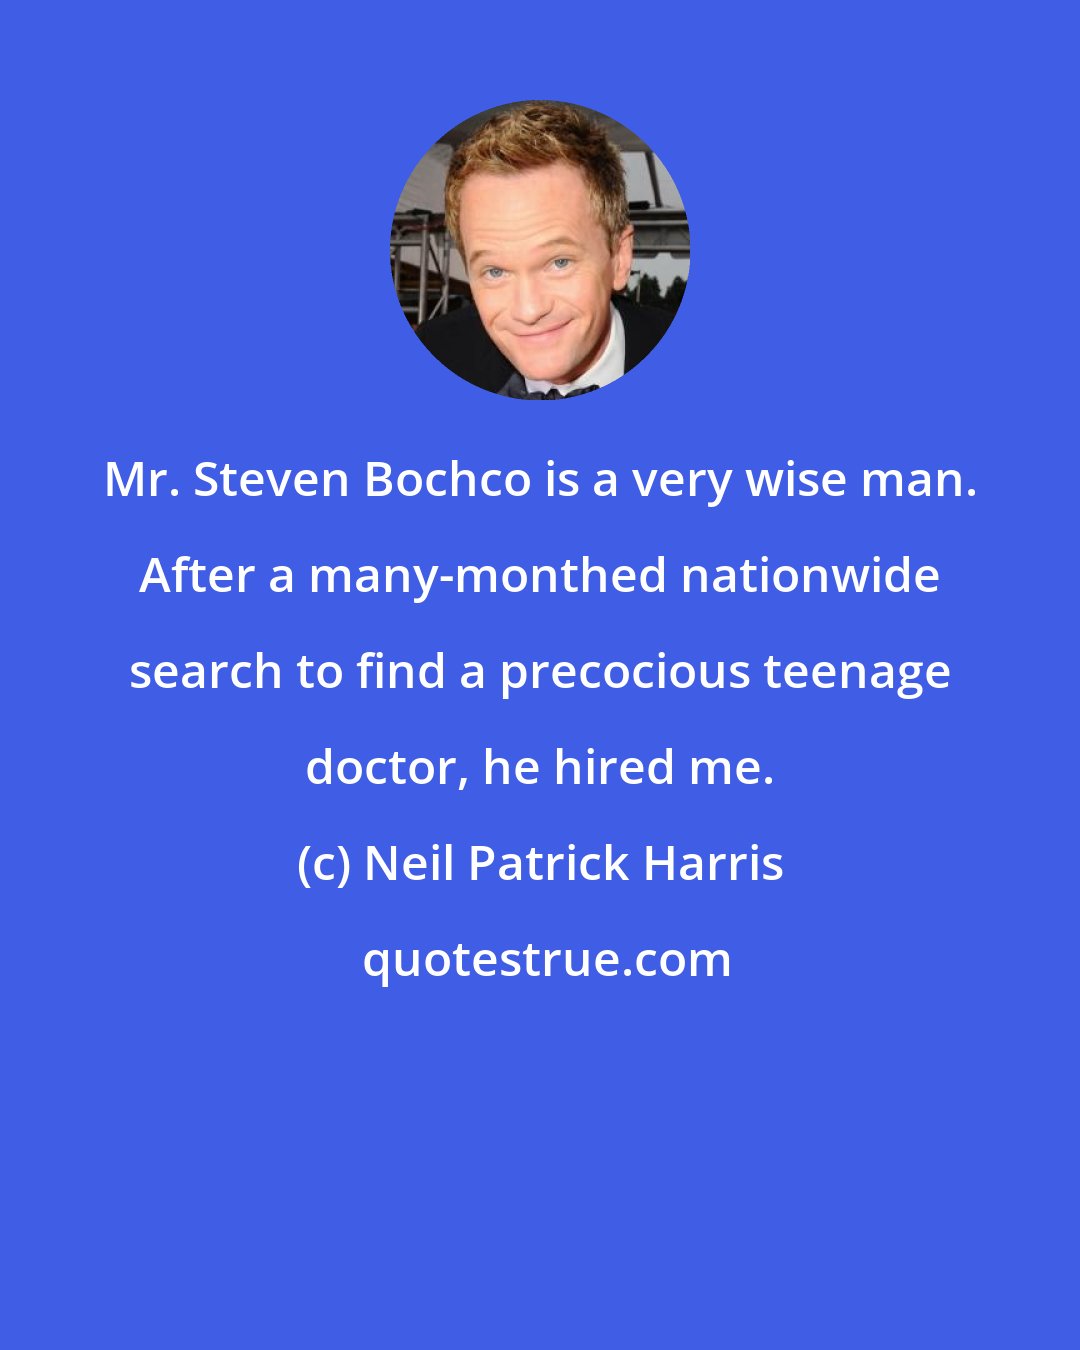 Neil Patrick Harris: Mr. Steven Bochco is a very wise man. After a many-monthed nationwide search to find a precocious teenage doctor, he hired me.